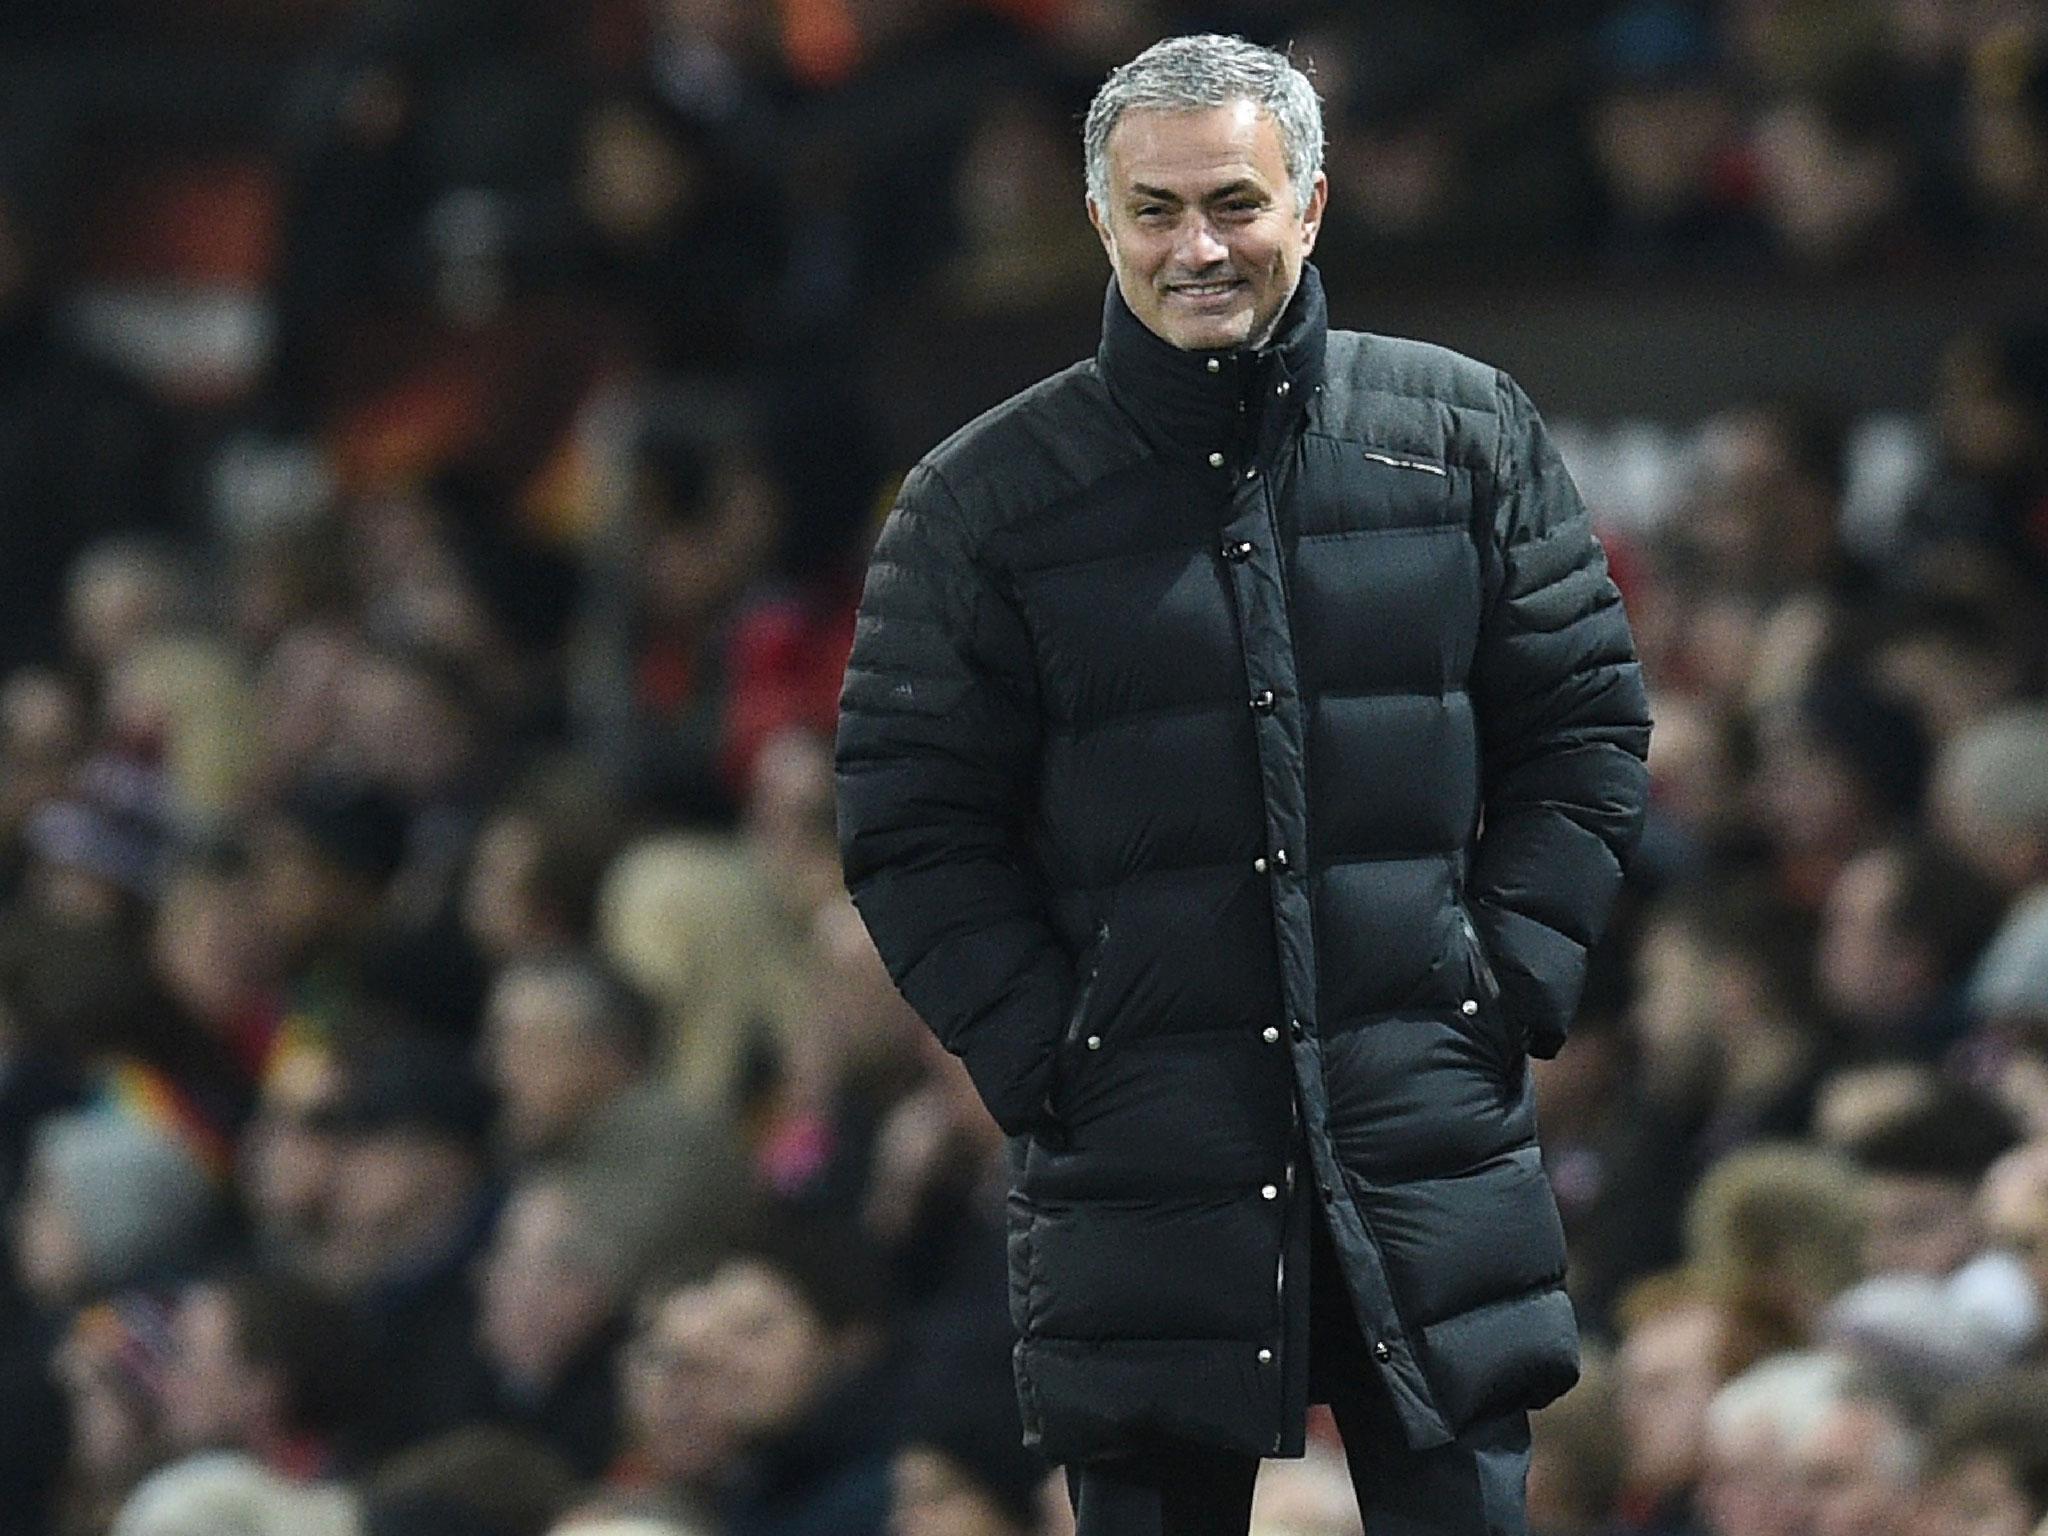 Jose Mourinho believes Manchester United are not out of the Premier League title race yet